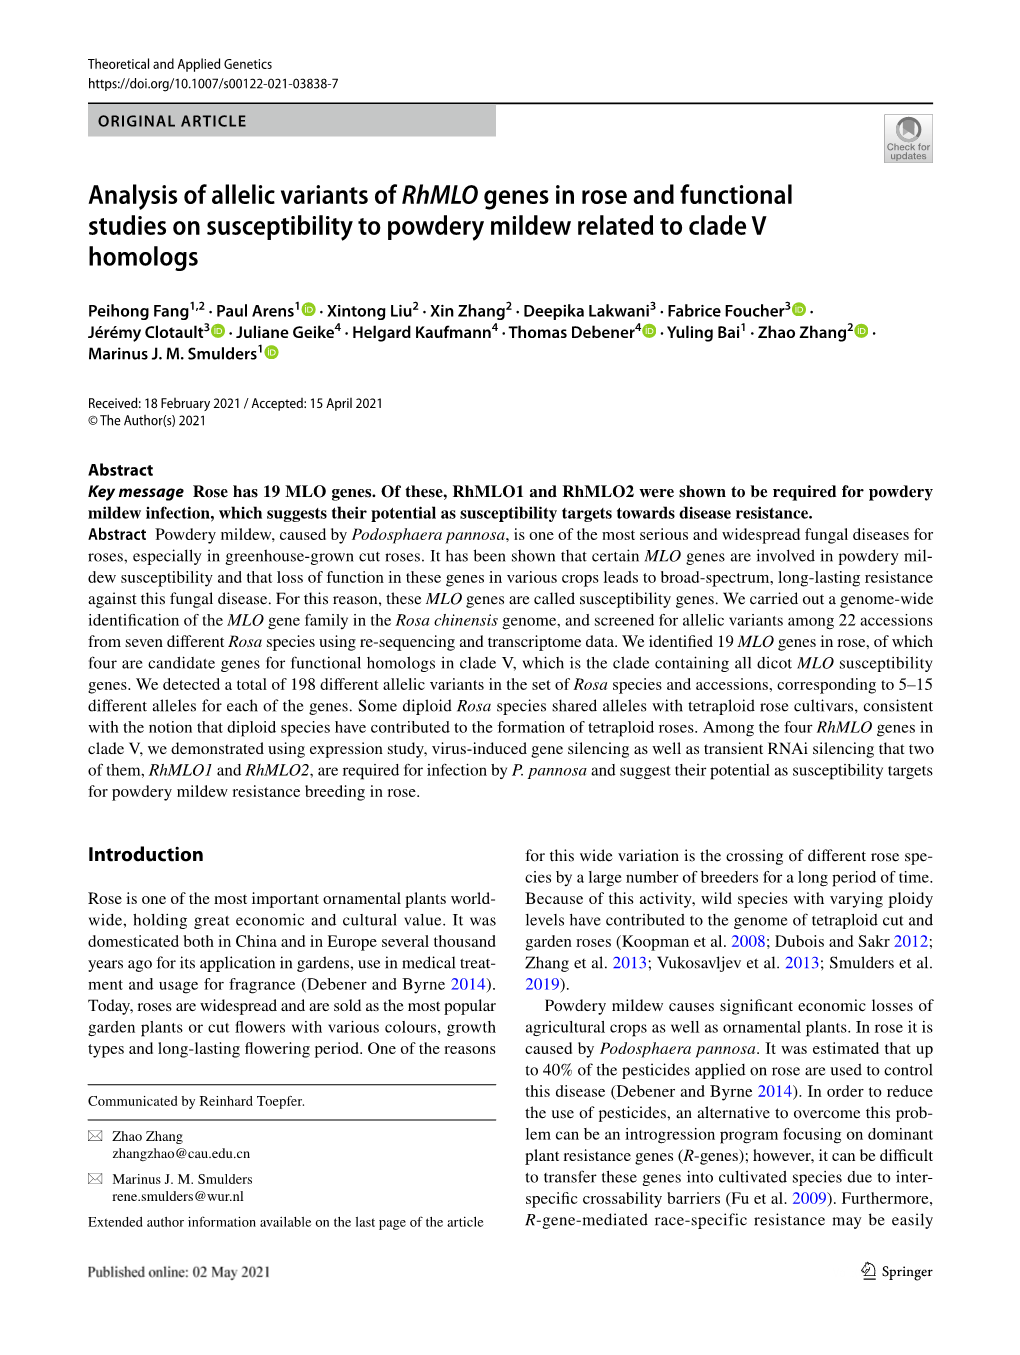 Analysis of Allelic Variants of Rhmlo Genes in Rose and Functional Studies on Susceptibility to Powdery Mildew Related to Clade V Homologs